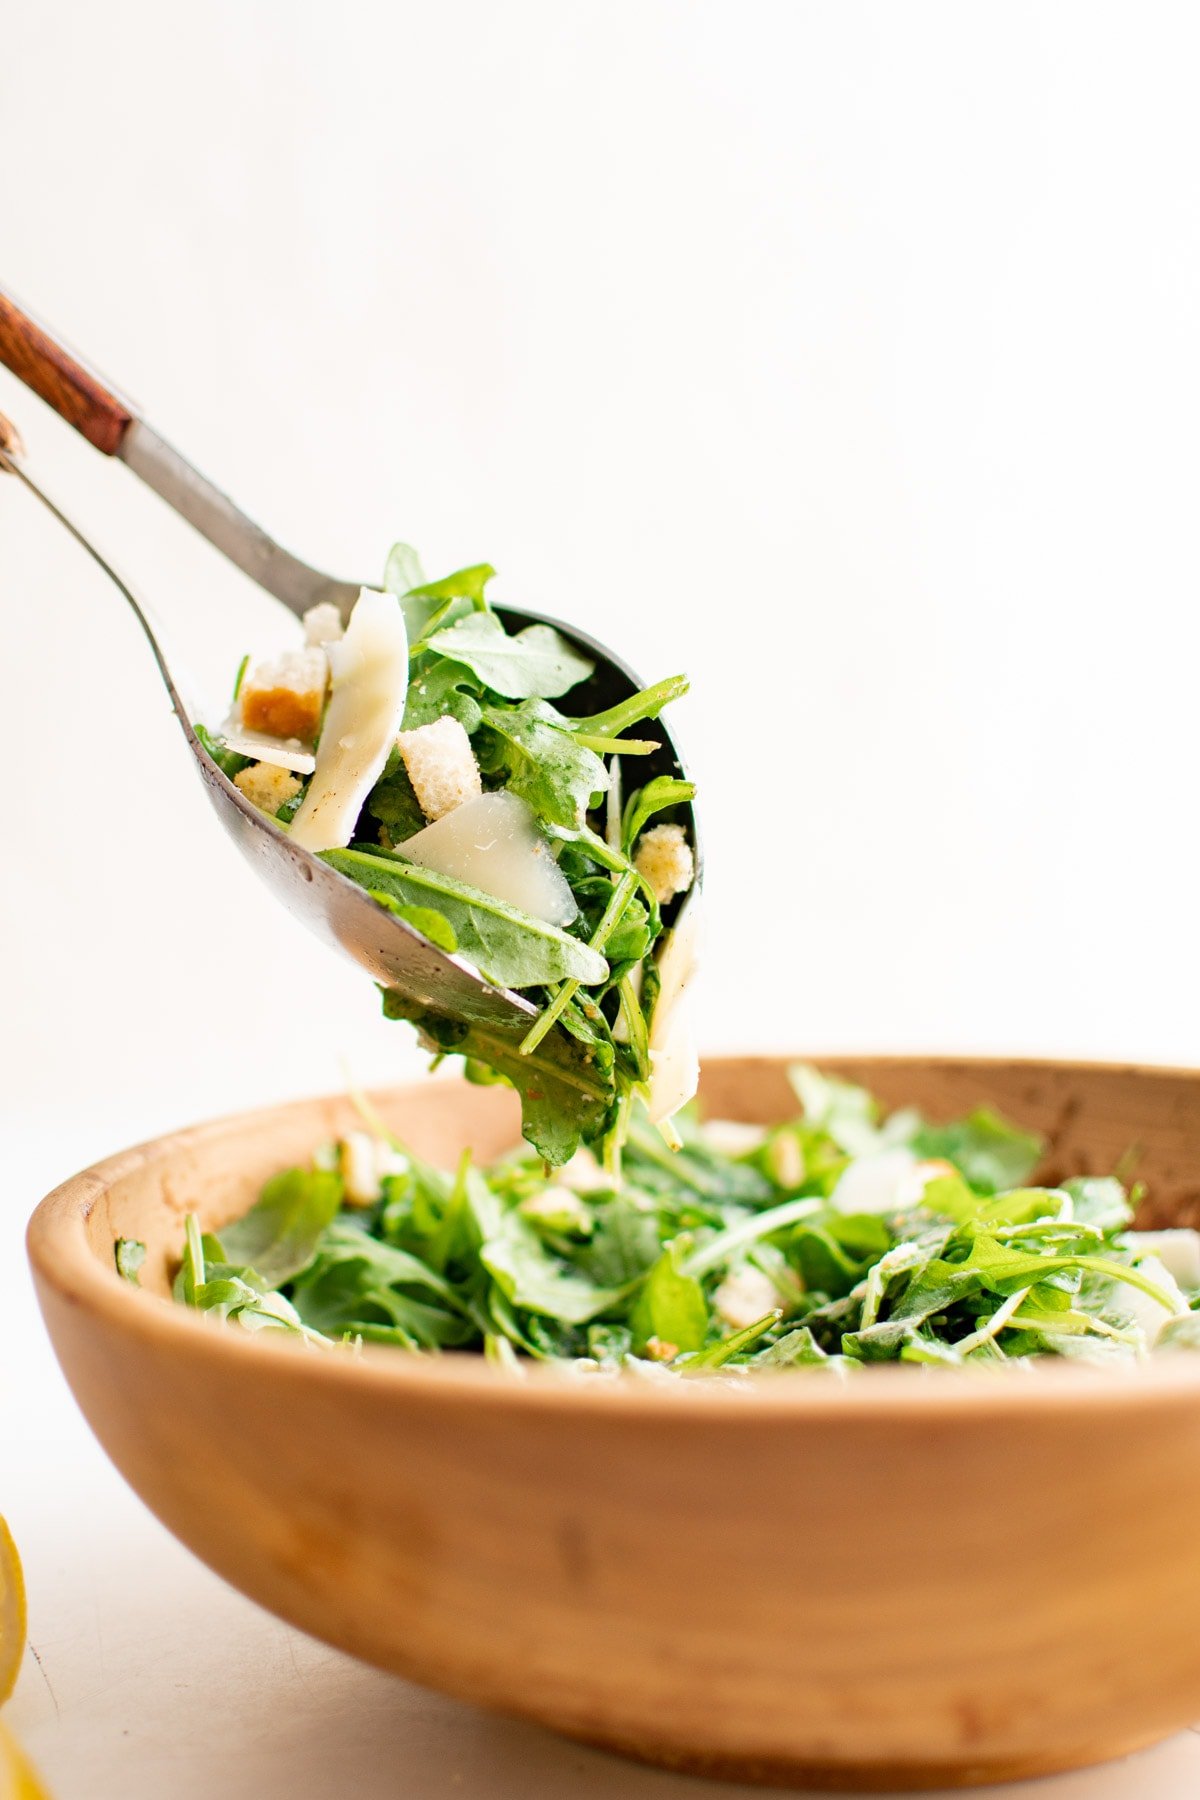 Arugula salad with salad tongs in a wooden bowl